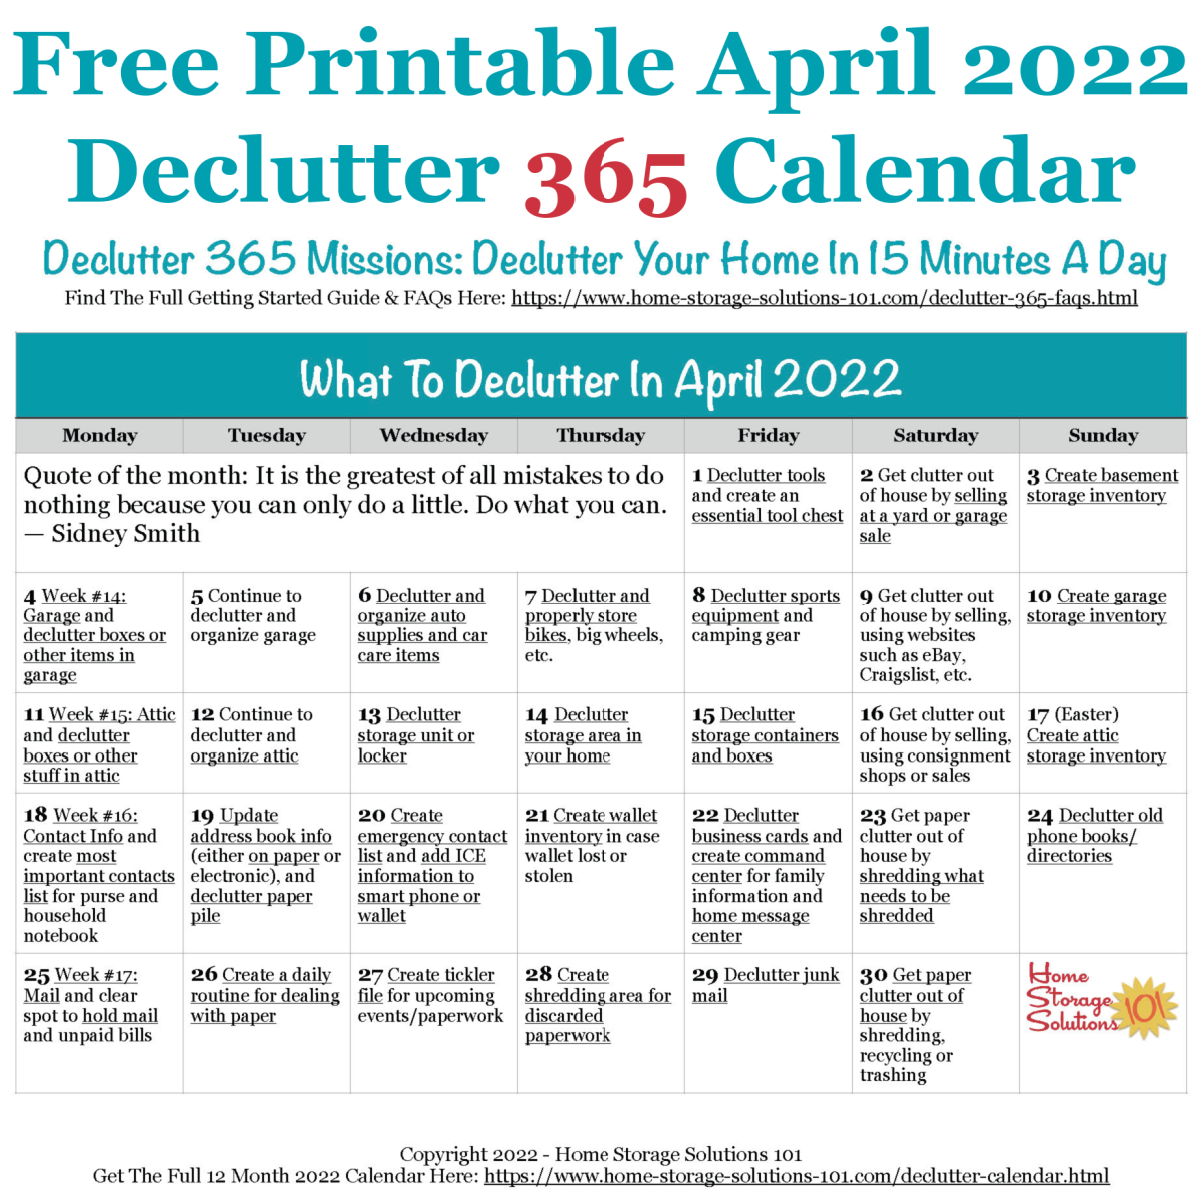 Free printable April 2022 #decluttering calendar with daily 15 minute missions. Follow the entire #Declutter365 plan provided by Home Storage Solutions 101 to #declutter your whole house in a year.